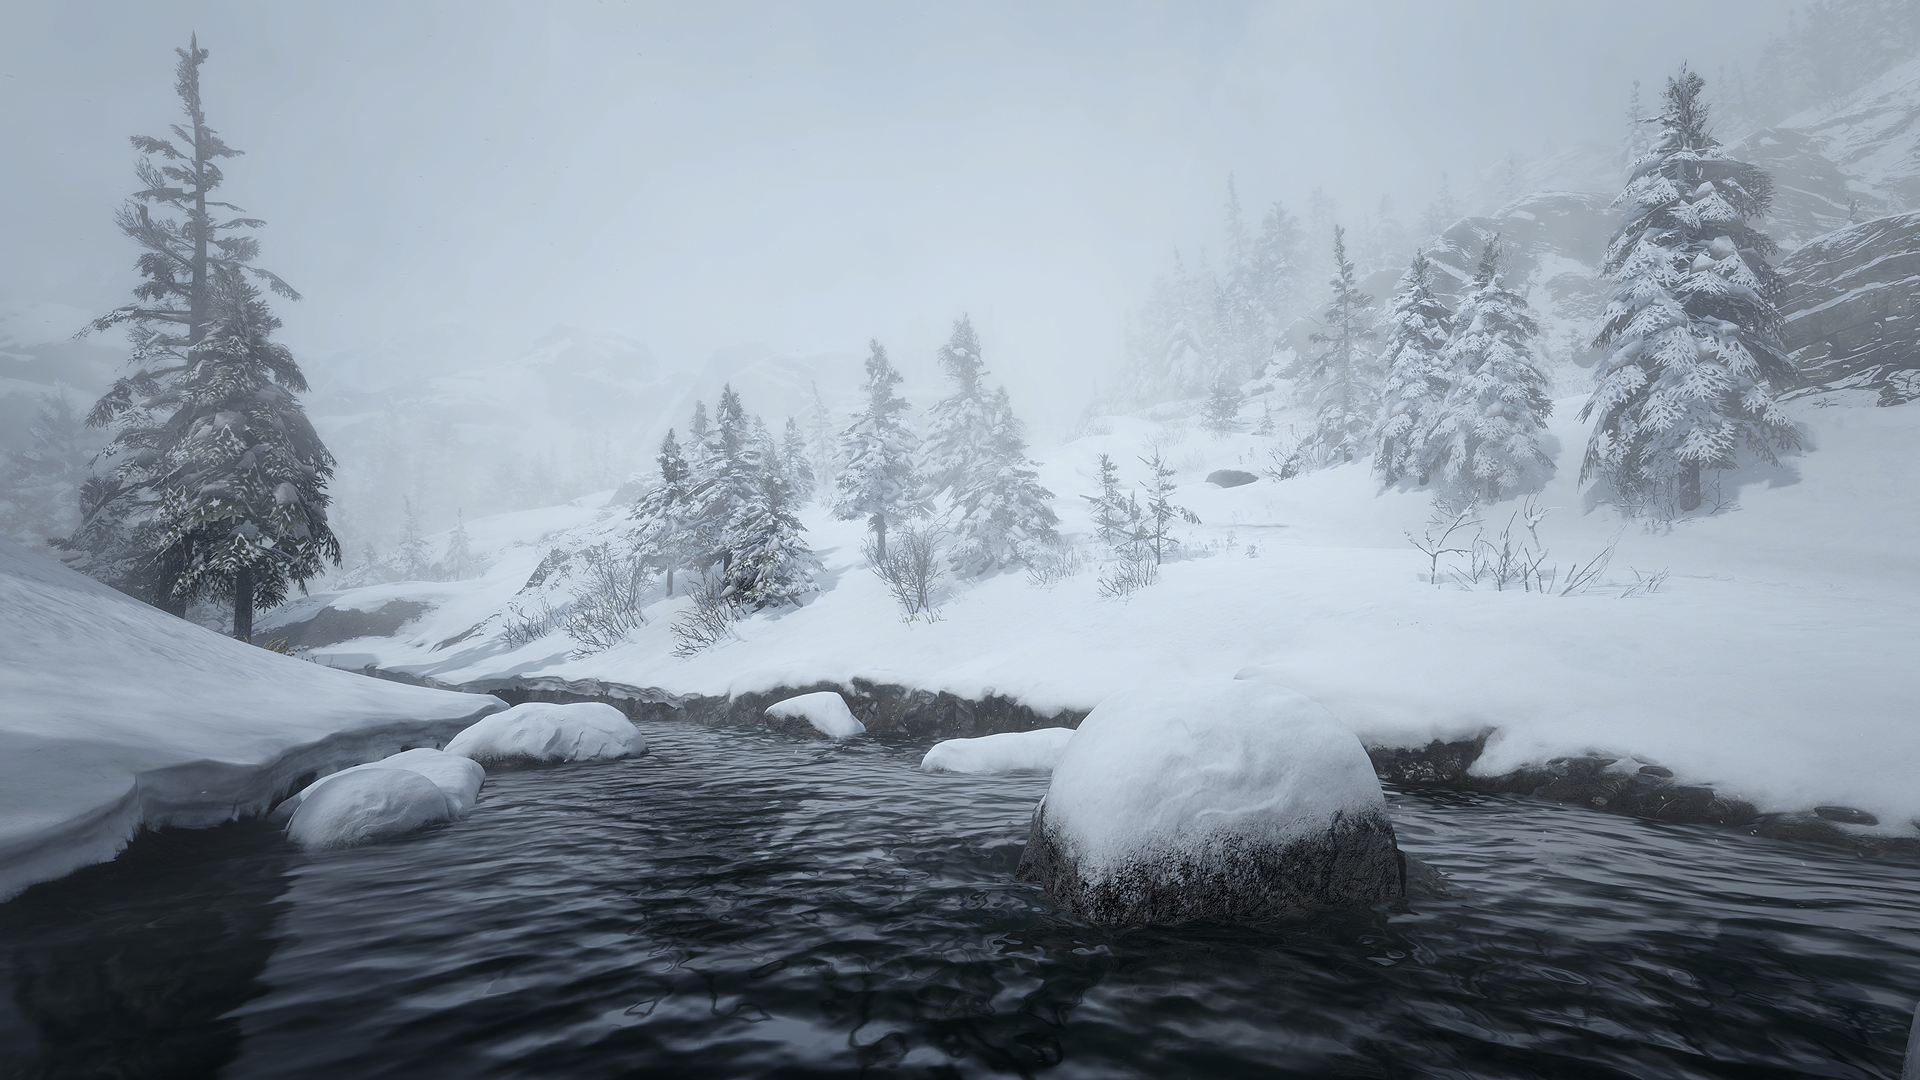 General 1920x1080 Red Dead Redemption 2 video games PC gaming nature landscape winter screen shot river